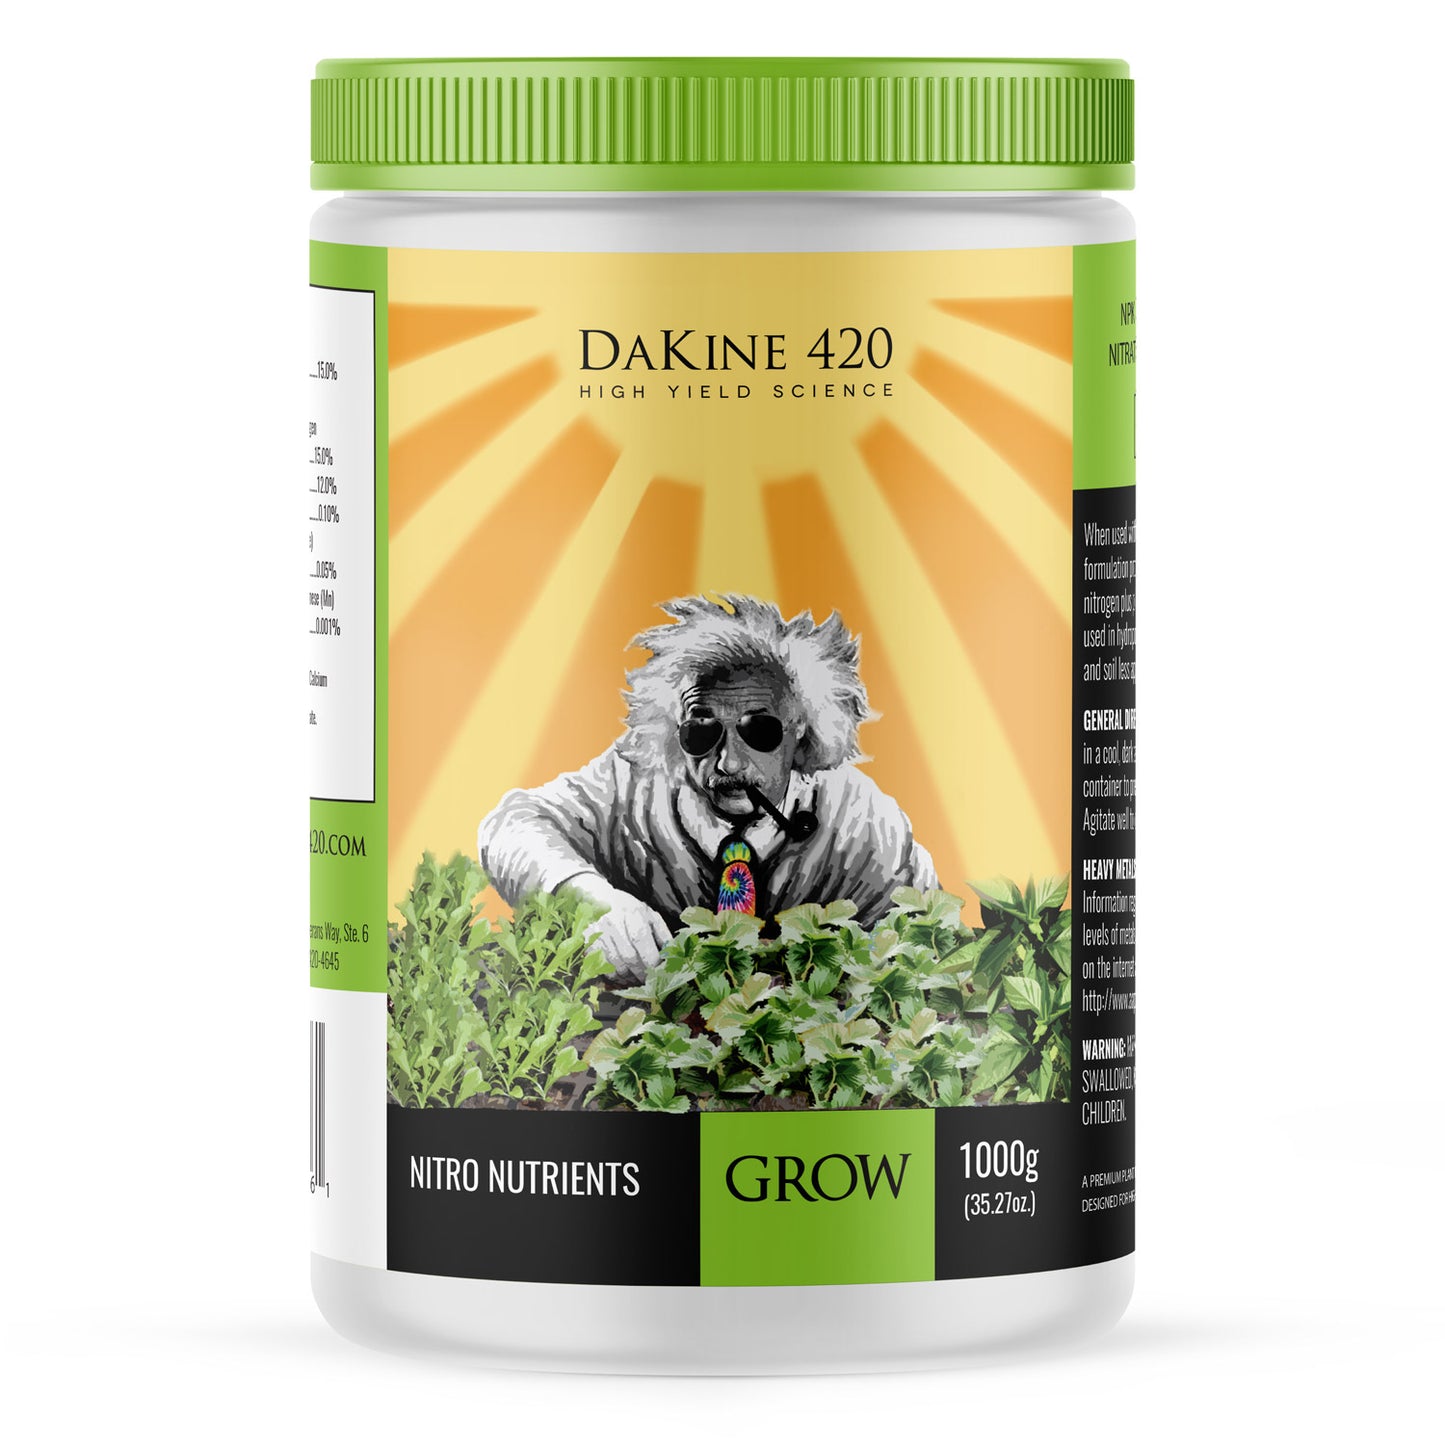 GROW makes your plants explode and thrive throughout the growing season. Grow is packed with Nitrate nitrogen, the most efficient nitrogen source for superior plant growth.